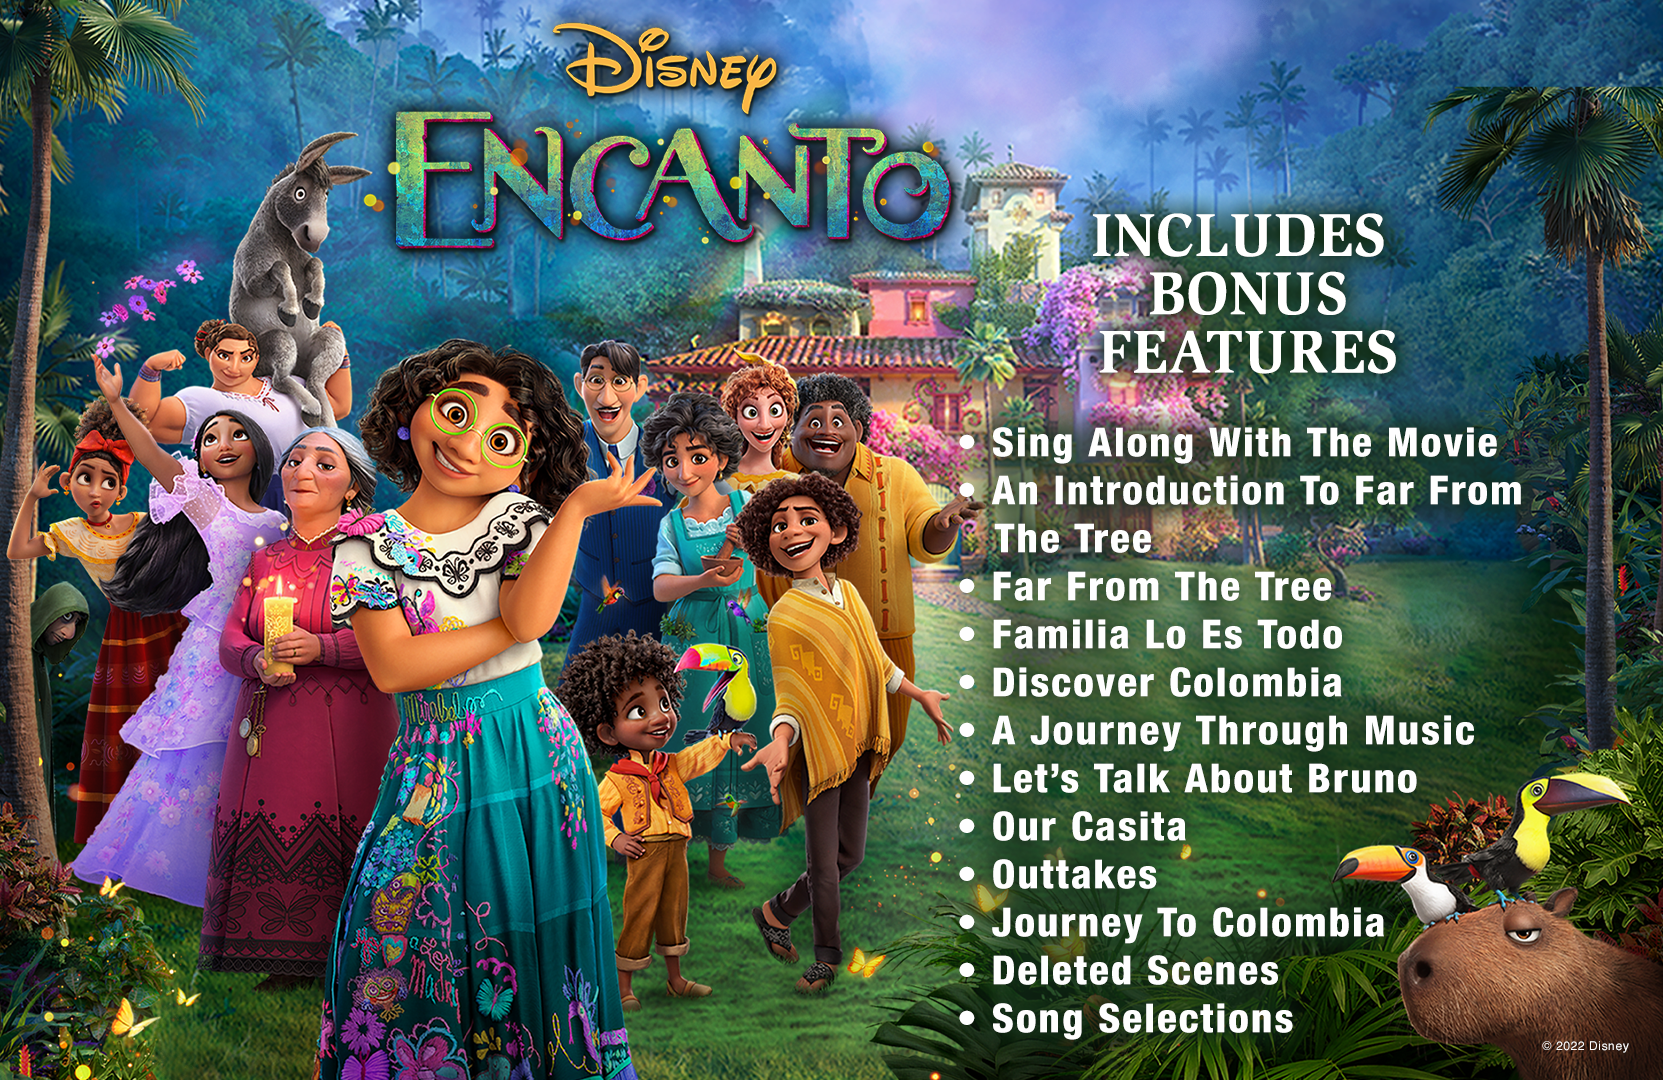 Image showing Mirabeland family standing on the left with text on the right. Text reads, INCLUDES BONUS FEATURES, Sing Along With The Movie, An Introduction To Far From The Tree, Far From The Tree, Familia Lo Es Todo, Discover Colombia, A Journey Through Music, Let's Talk About Bruno, Our Casita, Outtakes, Journey To Colombia, Deleted Scenes, Song Selections